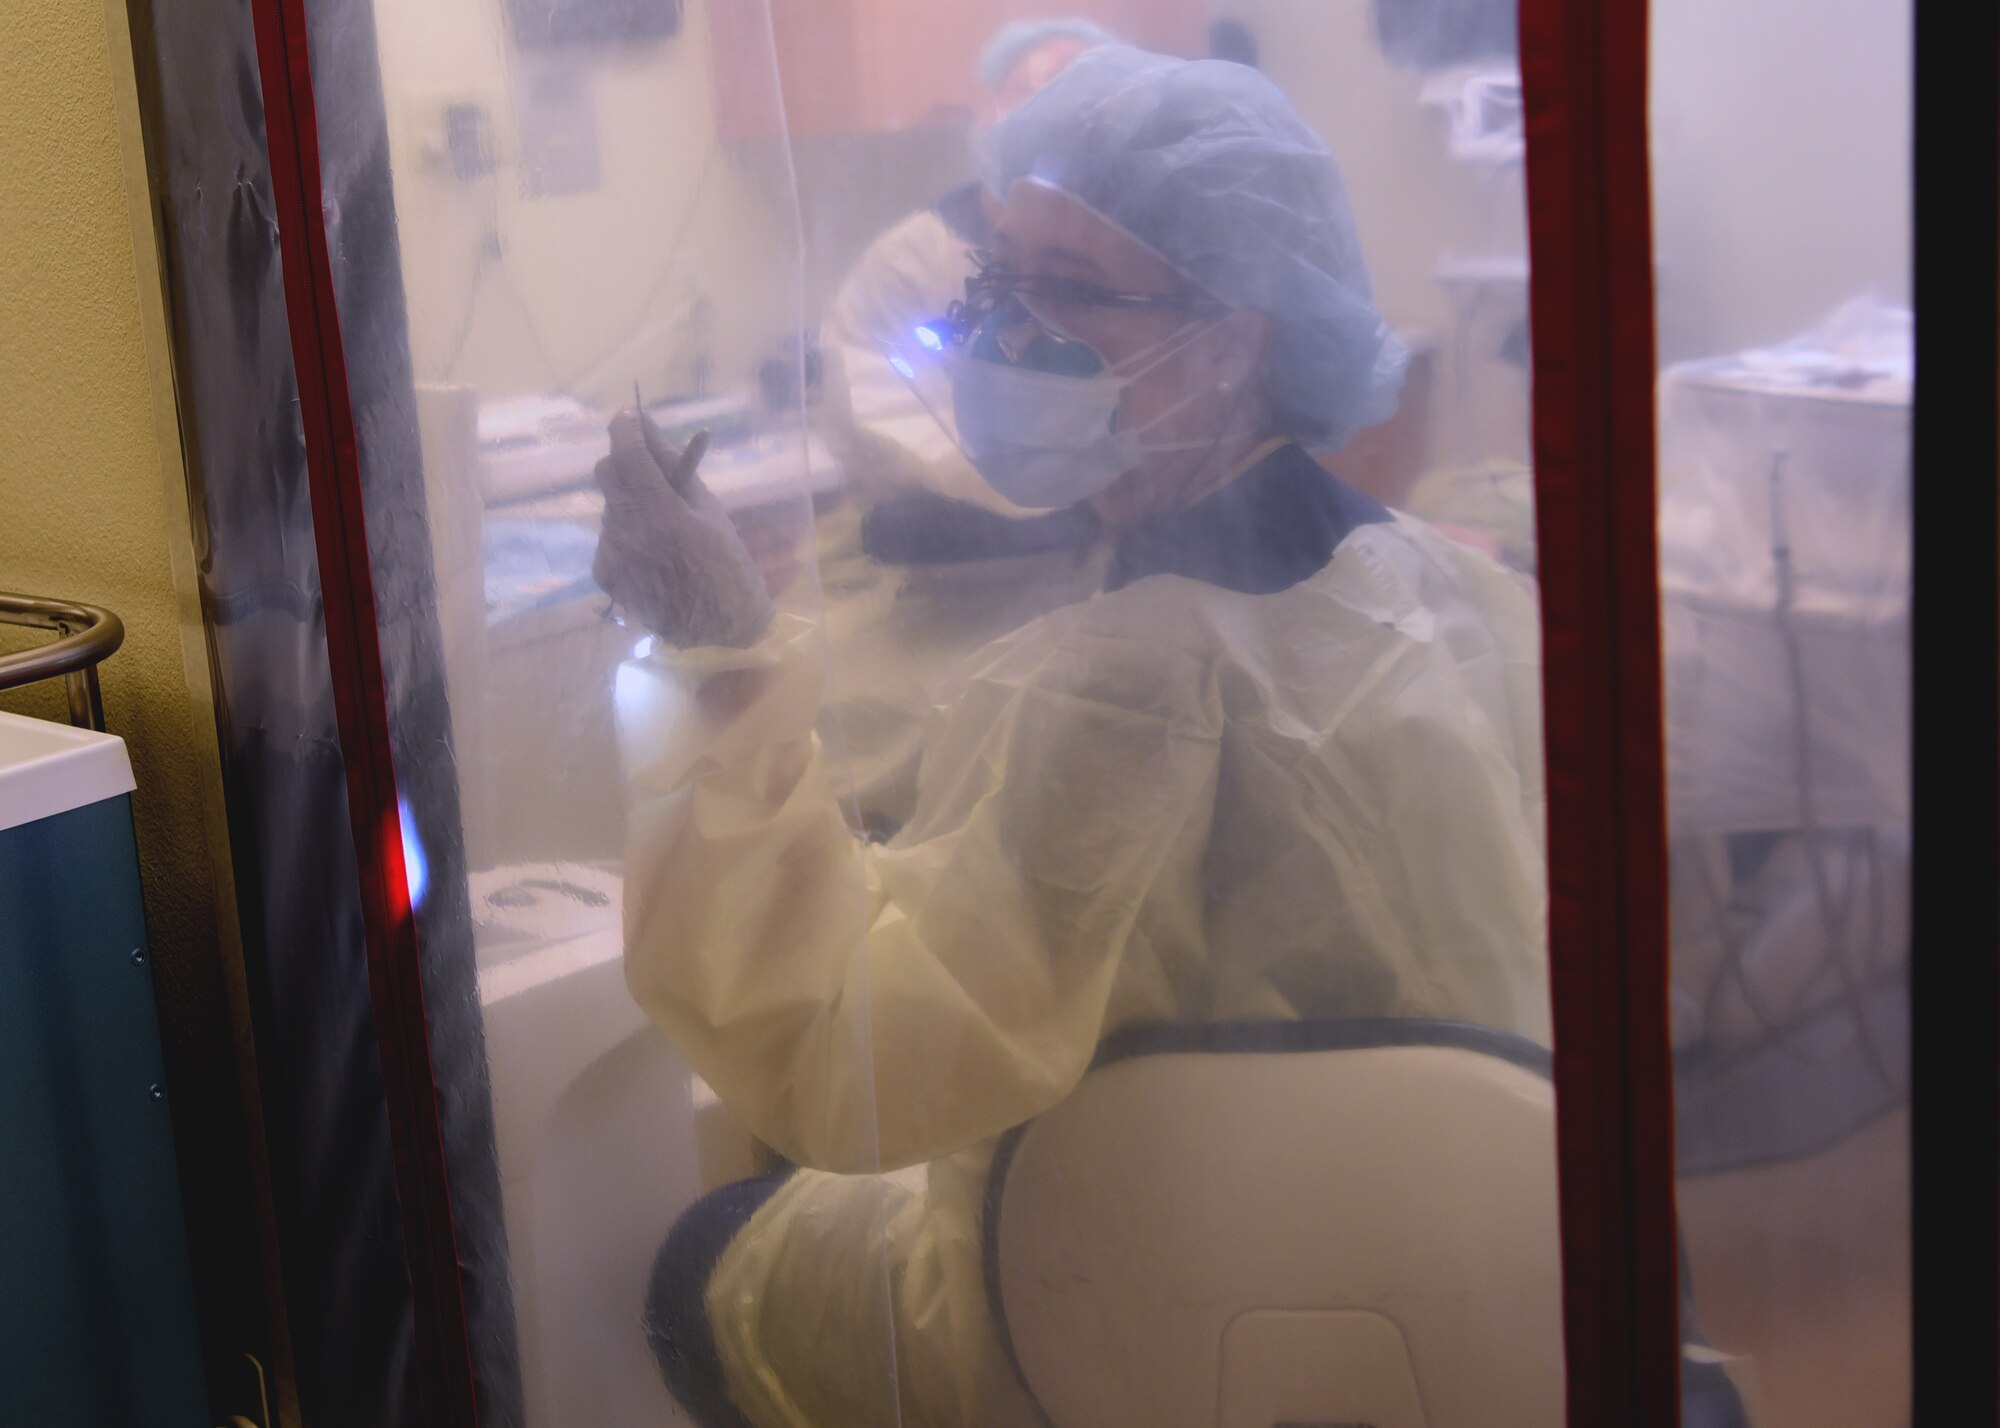 U.S. Air Force Capt. Melissa Seibert, 17th Medical Group general dentist, wears personal protective equipment to avoid undetected COVID-19 exposure, while performing dental duties, at the Ross Clinic’s dental facility, on Goodfellow Air Force Base, Texas, Aug. 5, 2020. In addition to Seibert’s PPE, the Ross Clinic enforced a single-point entry control, COVID-19 questionnaire screenings and protective reception desk and patient exam room barriers to remain undeterred through the pandemic.  (U.S. Air Force photo by Airman 1st Class Abbey Rieves)